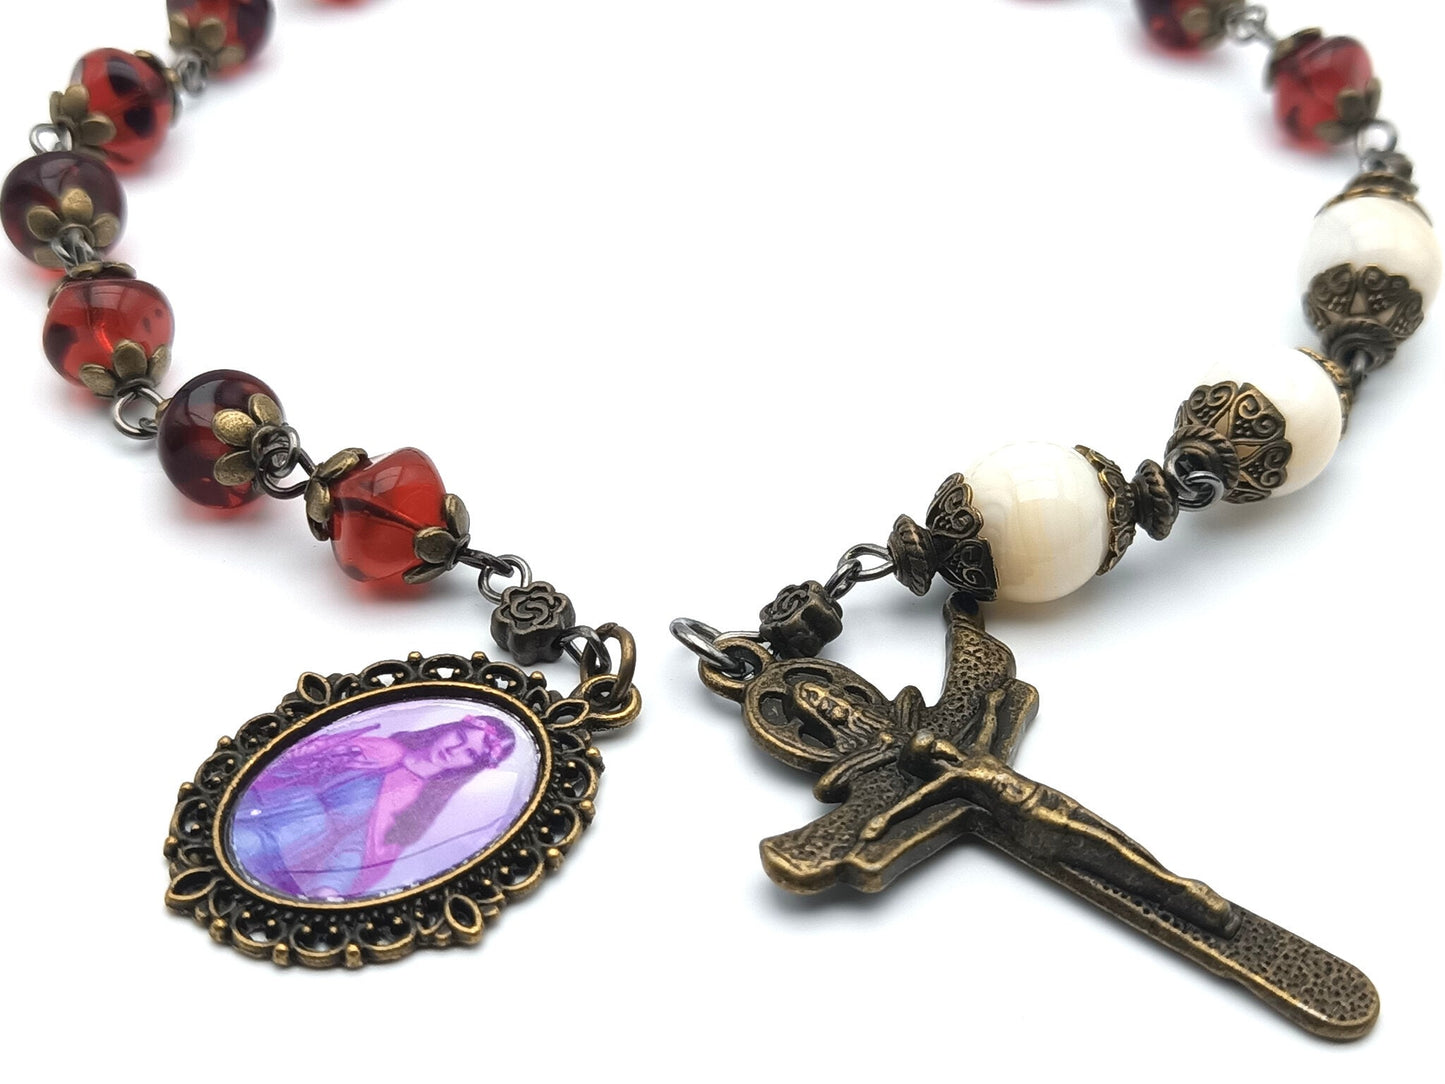 Saint Philomena unique rosary beads prayer chaplet with red nugget glass and opal beads, bronze bead caps, crucifix and picture medal.